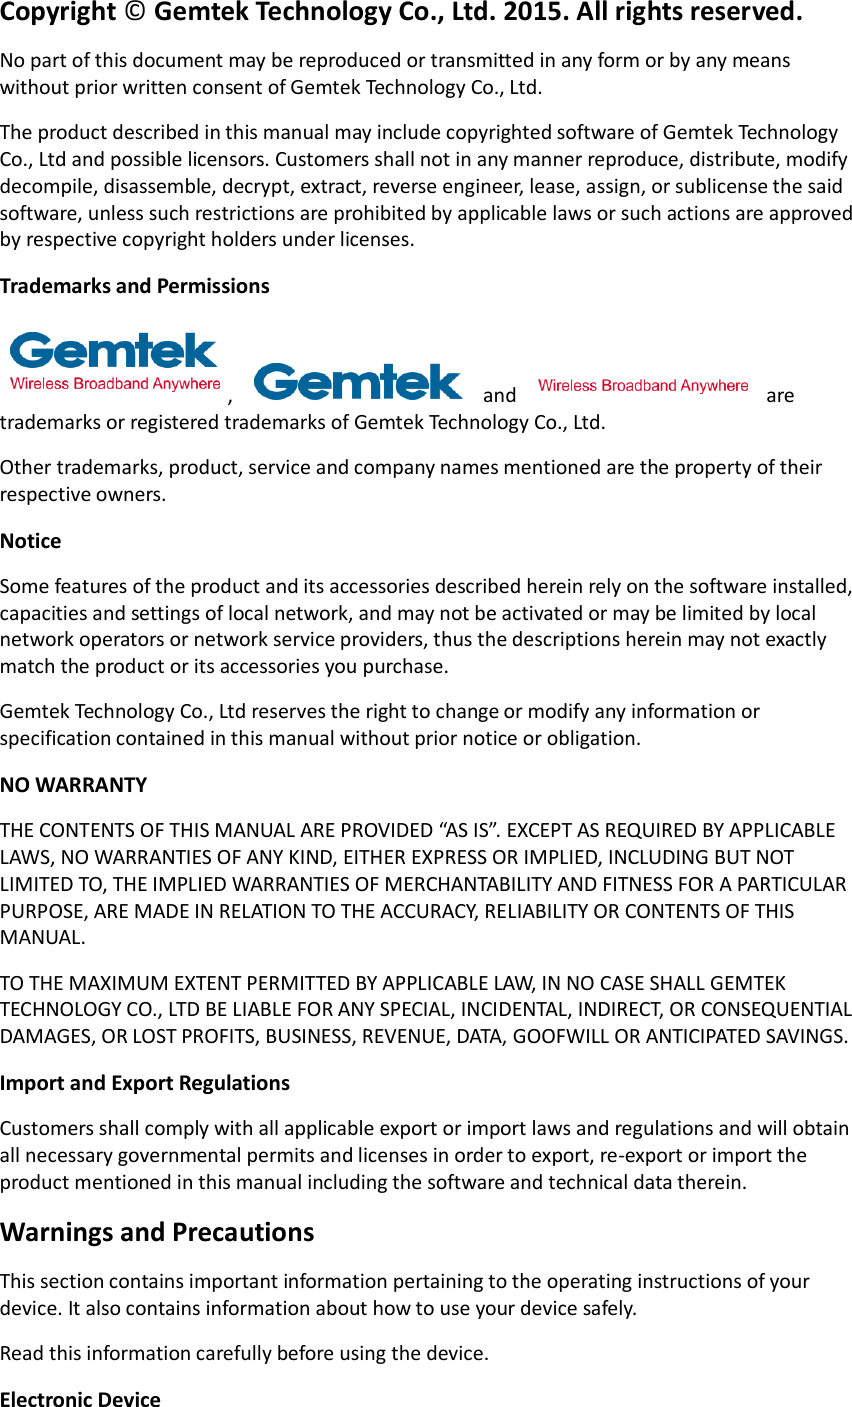 Copyright © Gemtek Technology Co., Ltd. 2015. All rights reserved. No part of this document may be reproduced or transmitted in any form or by any means without prior written consent of Gemtek Technology Co., Ltd. The product described in this manual may include copyrighted software of Gemtek Technology Co., Ltd and possible licensors. Customers shall not in any manner reproduce, distribute, modify decompile, disassemble, decrypt, extract, reverse engineer, lease, assign, or sublicense the said software, unless such restrictions are prohibited by applicable laws or such actions are approved by respective copyright holders under licenses. Trademarks and Permissions ,    and    are trademarks or registered trademarks of Gemtek Technology Co., Ltd. Other trademarks, product, service and company names mentioned are the property of their respective owners. Notice Some features of the product and its accessories described herein rely on the software installed, capacities and settings of local network, and may not be activated or may be limited by local network operators or network service providers, thus the descriptions herein may not exactly match the product or its accessories you purchase. Gemtek Technology Co., Ltd reserves the right to change or modify any information or specification contained in this manual without prior notice or obligation. NO WARRANTY THE CONTENTS OF THIS MANUAL ARE PROVIDED “AS IS”. EXCEPT AS REQUIRED BY APPLICABLE LAWS, NO WARRANTIES OF ANY KIND, EITHER EXPRESS OR IMPLIED, INCLUDING BUT NOT LIMITED TO, THE IMPLIED WARRANTIES OF MERCHANTABILITY AND FITNESS FOR A PARTICULAR PURPOSE, ARE MADE IN RELATION TO THE ACCURACY, RELIABILITY OR CONTENTS OF THIS MANUAL. TO THE MAXIMUM EXTENT PERMITTED BY APPLICABLE LAW, IN NO CASE SHALL GEMTEK TECHNOLOGY CO., LTD BE LIABLE FOR ANY SPECIAL, INCIDENTAL, INDIRECT, OR CONSEQUENTIAL DAMAGES, OR LOST PROFITS, BUSINESS, REVENUE, DATA, GOOFWILL OR ANTICIPATED SAVINGS. Import and Export Regulations Customers shall comply with all applicable export or import laws and regulations and will obtain all necessary governmental permits and licenses in order to export, re-export or import the product mentioned in this manual including the software and technical data therein. Warnings and Precautions This section contains important information pertaining to the operating instructions of your device. It also contains information about how to use your device safely. Read this information carefully before using the device. Electronic Device 